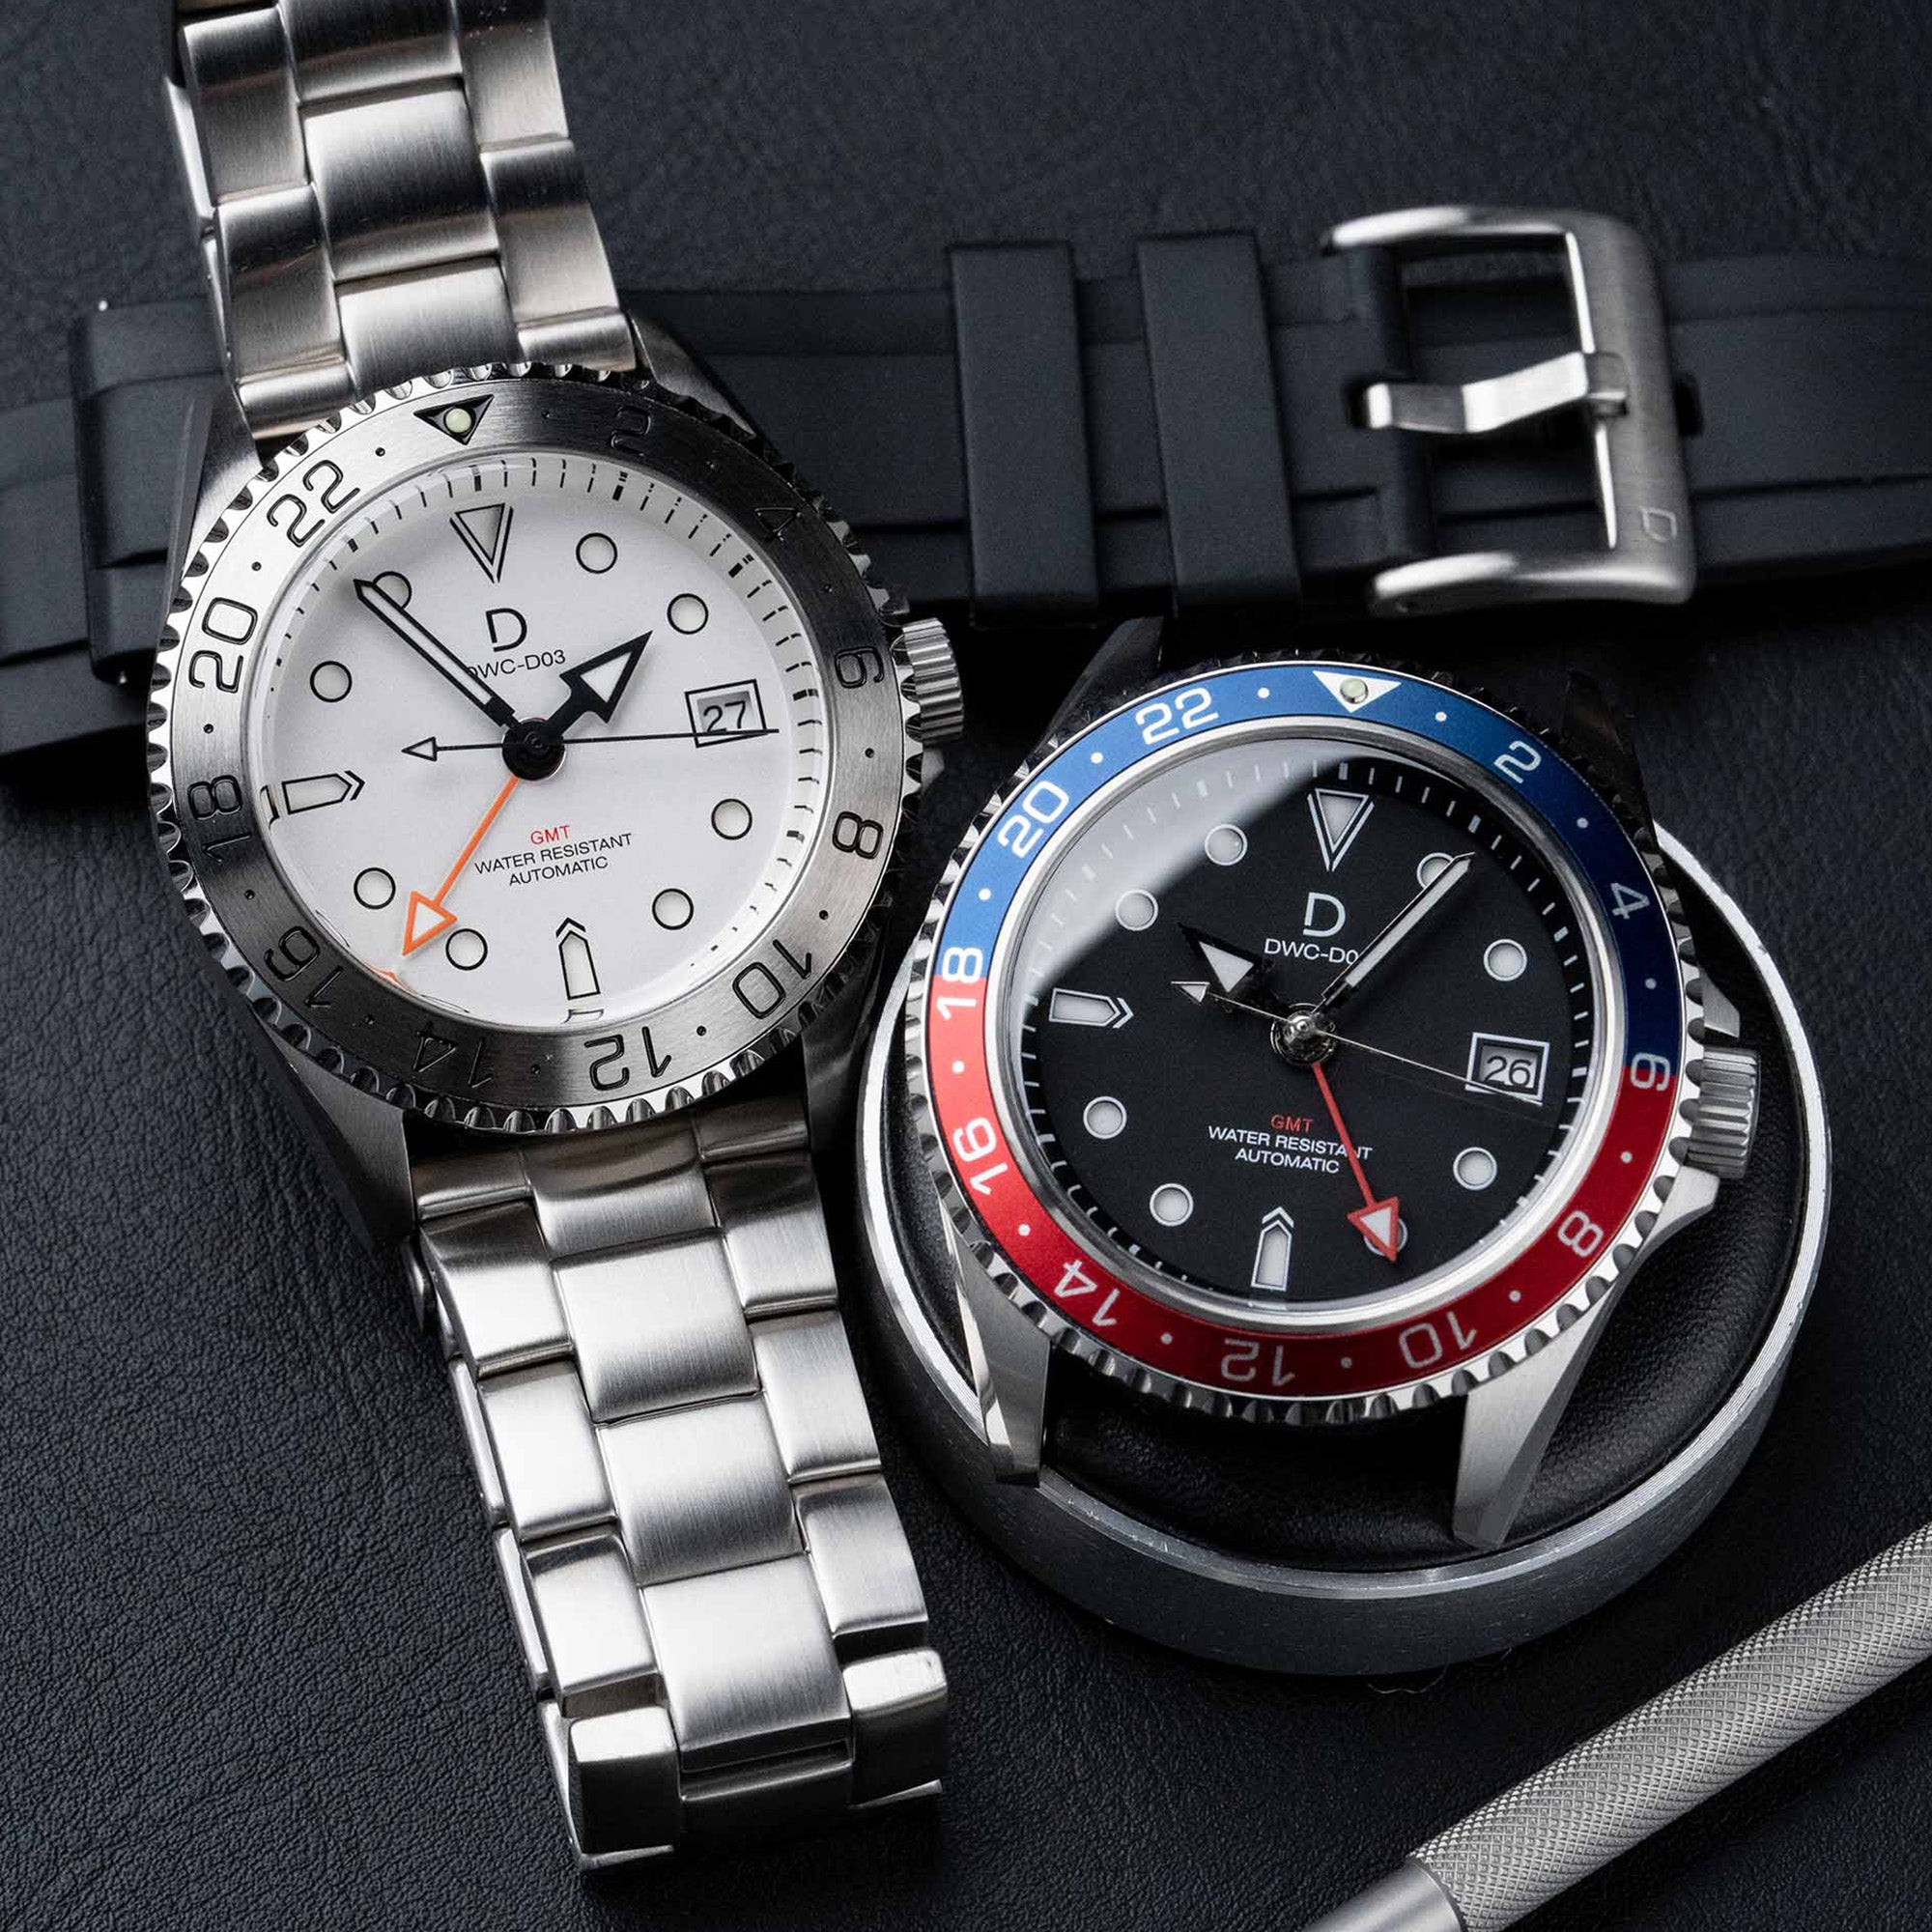 Pepsi GMT with another GMT with white dial